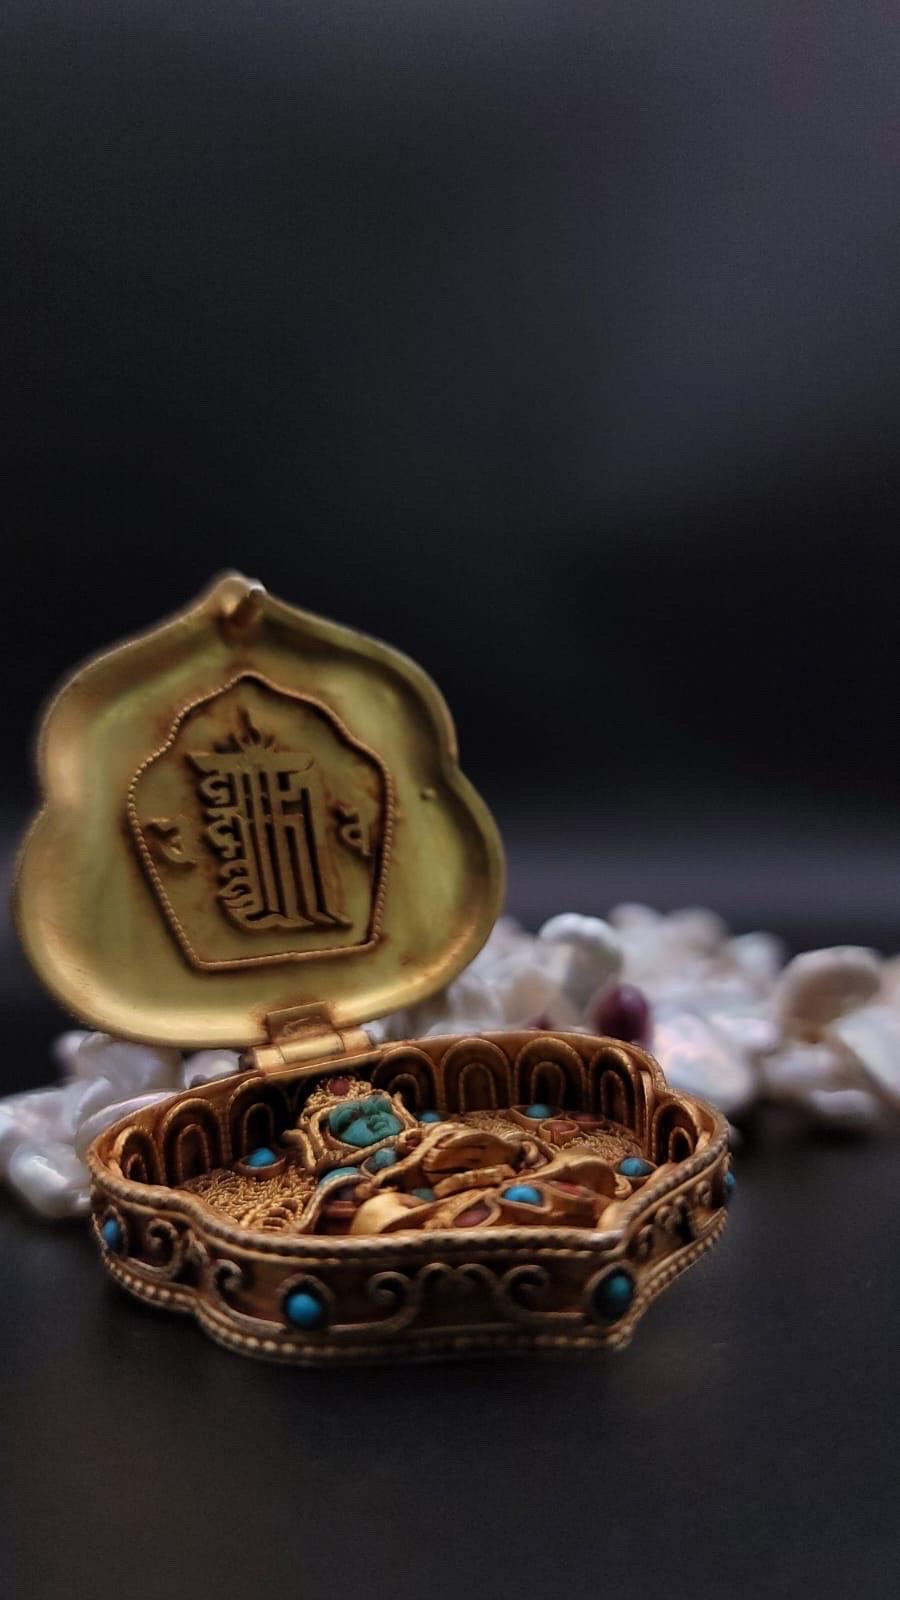 One-of-a-Kind

Introducing our latest treasure, the exceptionally beautiful Ghau Box from Tibet. Crafted by a gifted Monk with remarkable skills in filigree work, this 2